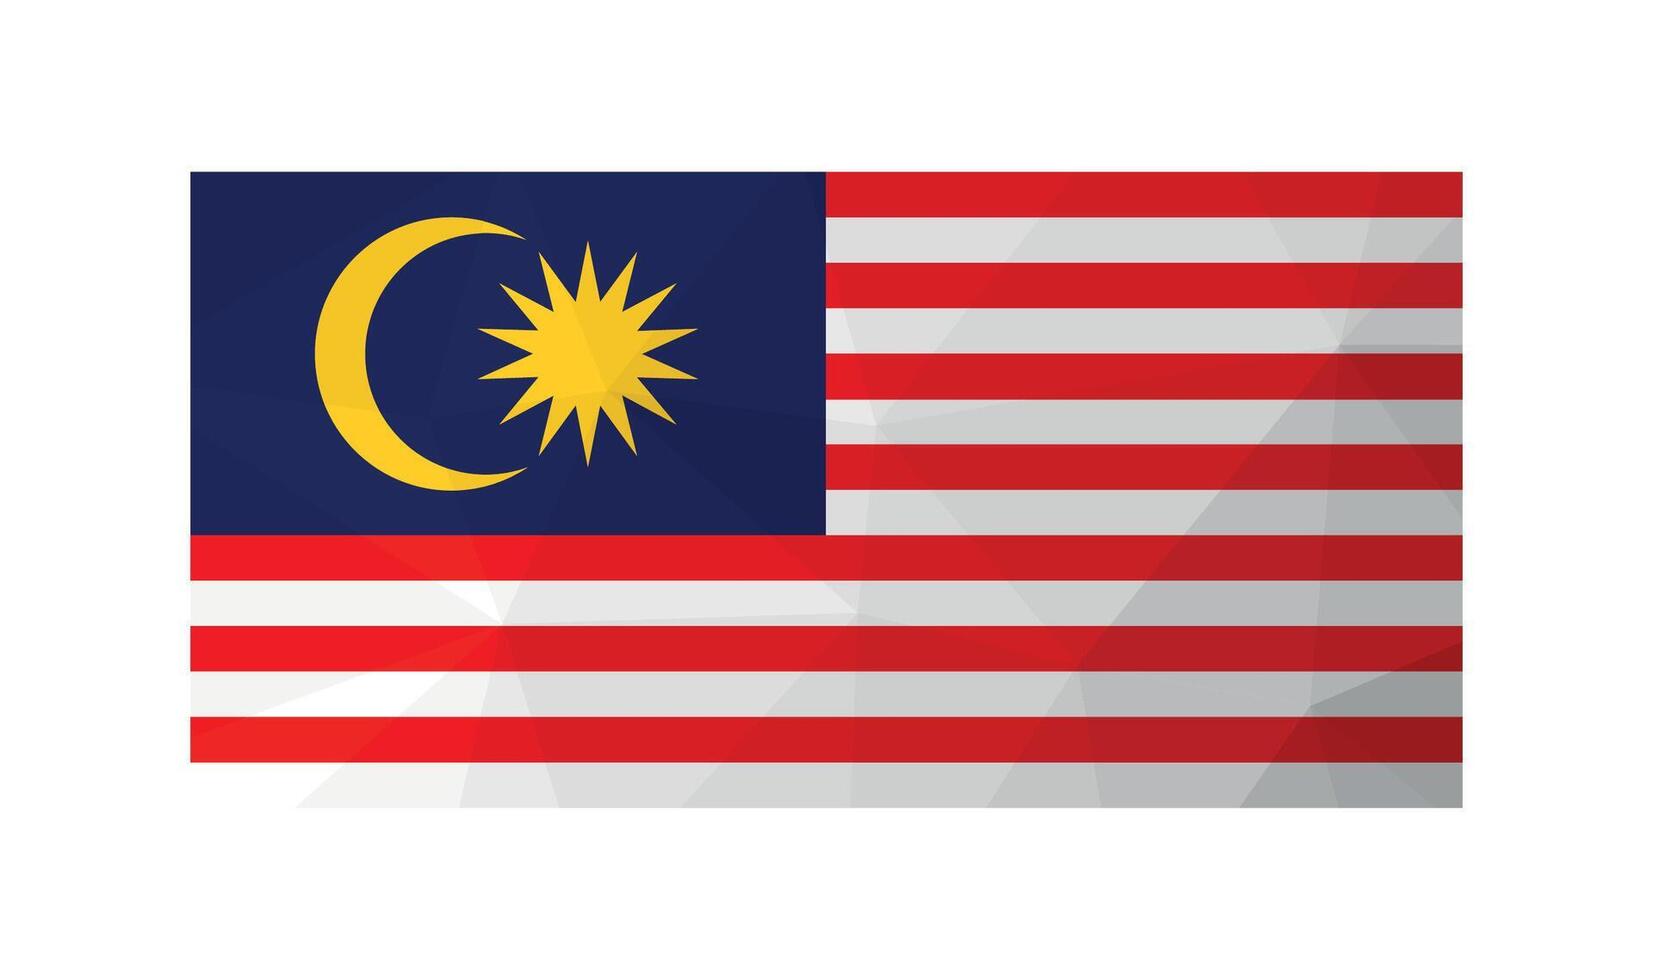 Vector illustration. Official symbol of Malaysia. National flag with red, white stripes and crescent with star. Creative design in low poly style with triangular shapes